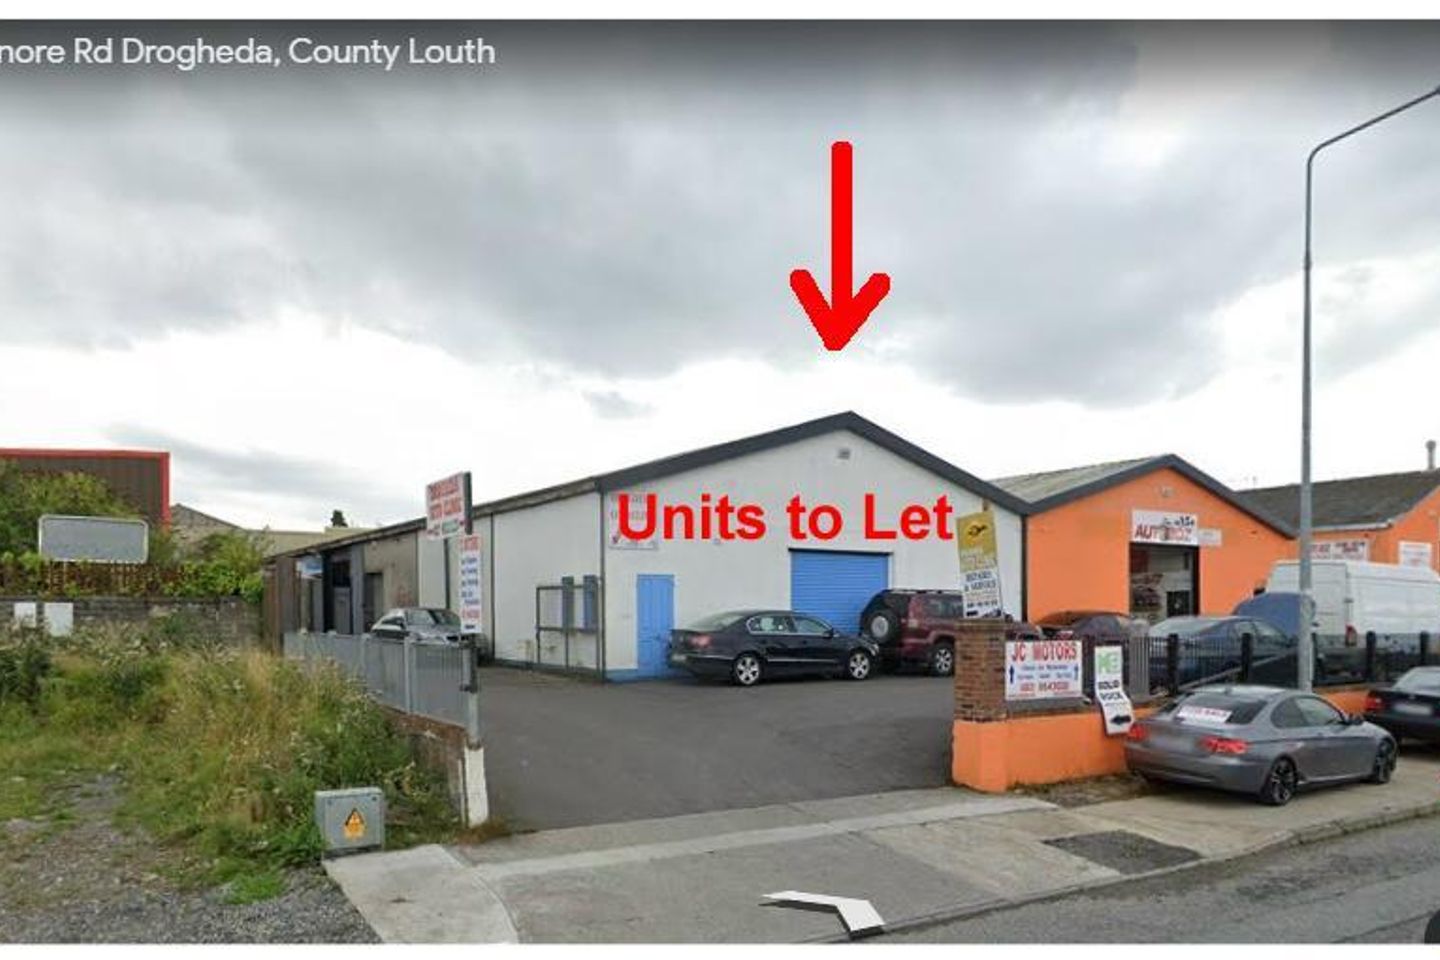 Unit to Let, Donore Road Industrial Park, Drogheda, Co. Louth